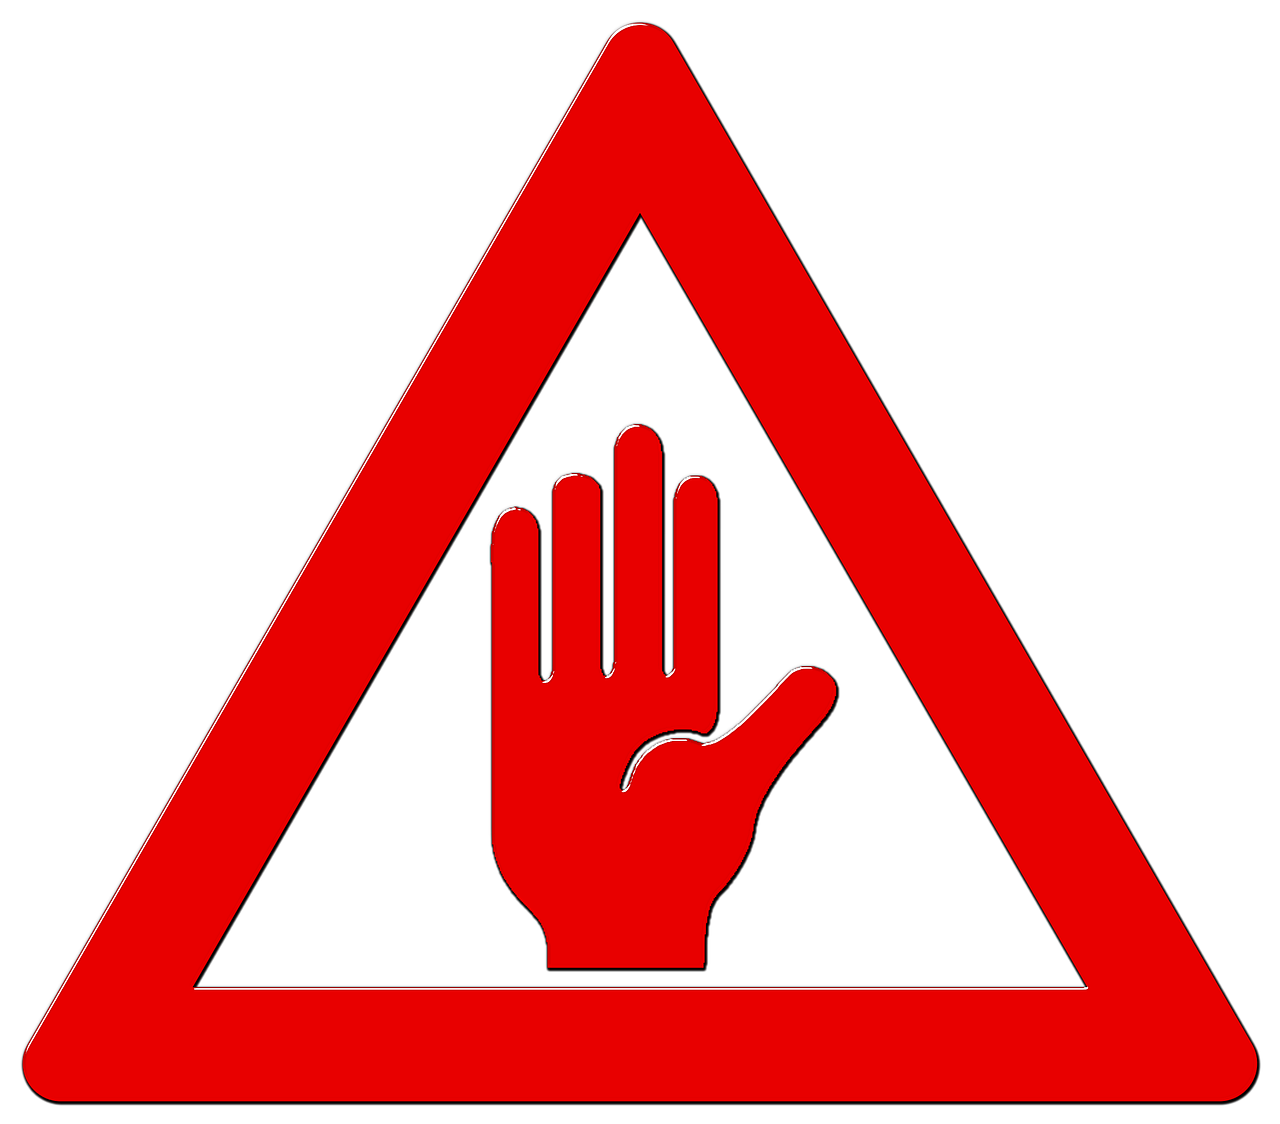 a red triangular sign with a hand on it, by Andrei Kolkoutine, pixabay, hindu, accident, against dark background, no rider